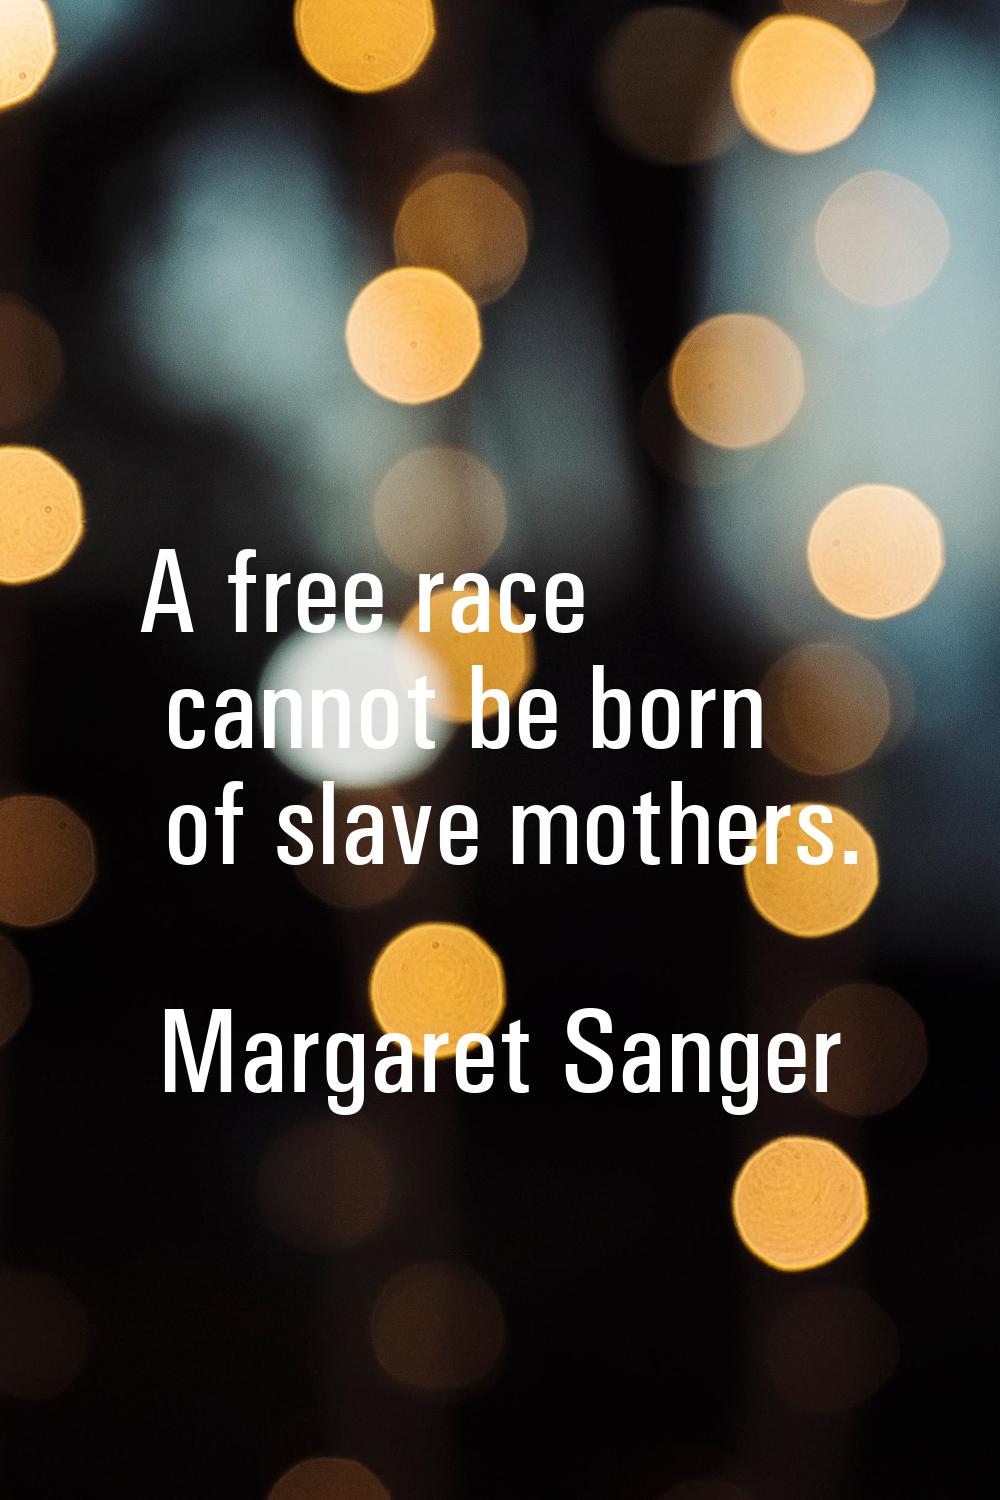 A free race cannot be born of slave mothers.